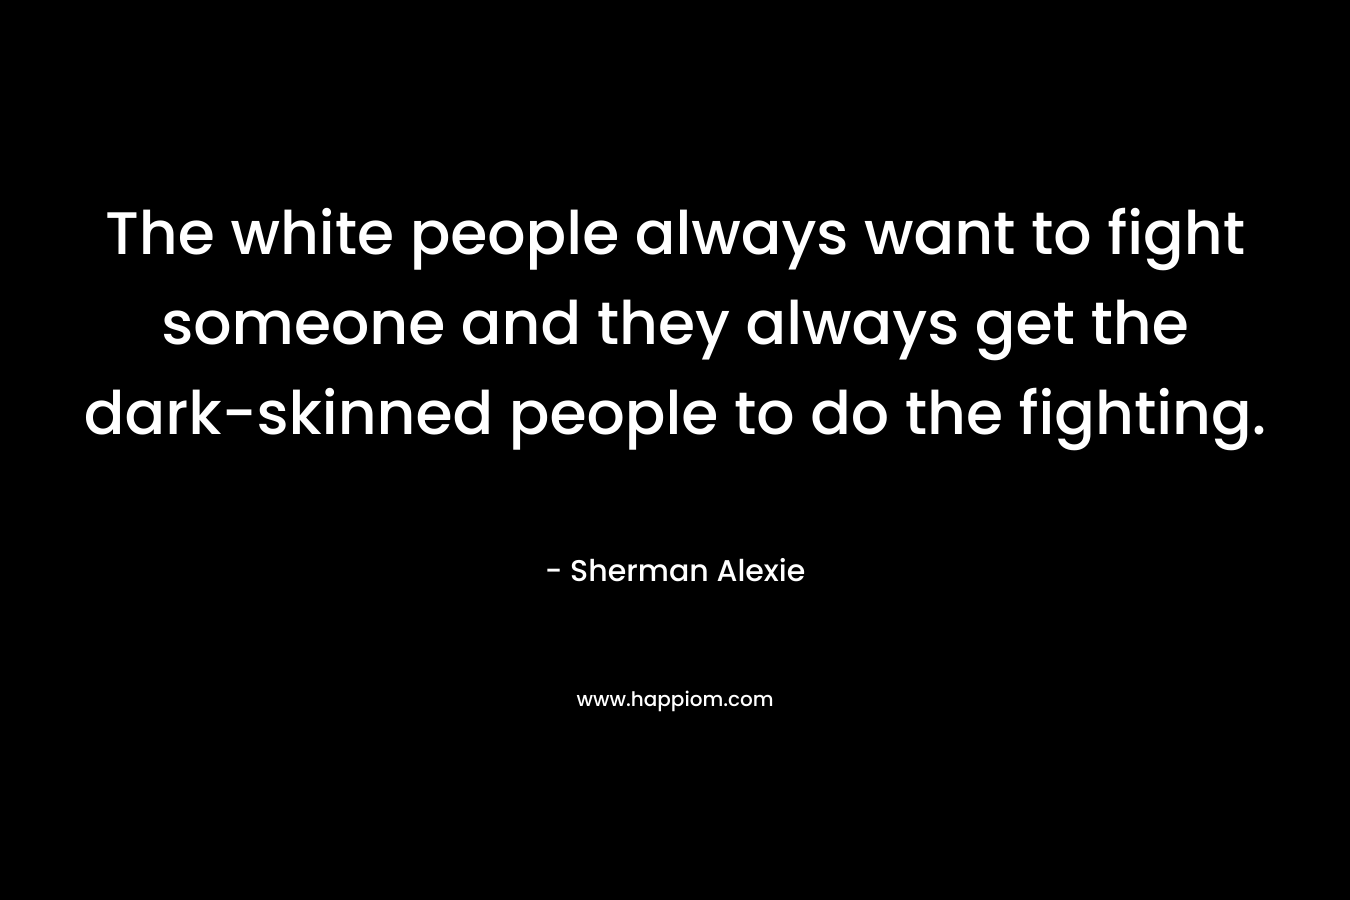 The white people always want to fight someone and they always get the dark-skinned people to do the fighting. – Sherman Alexie